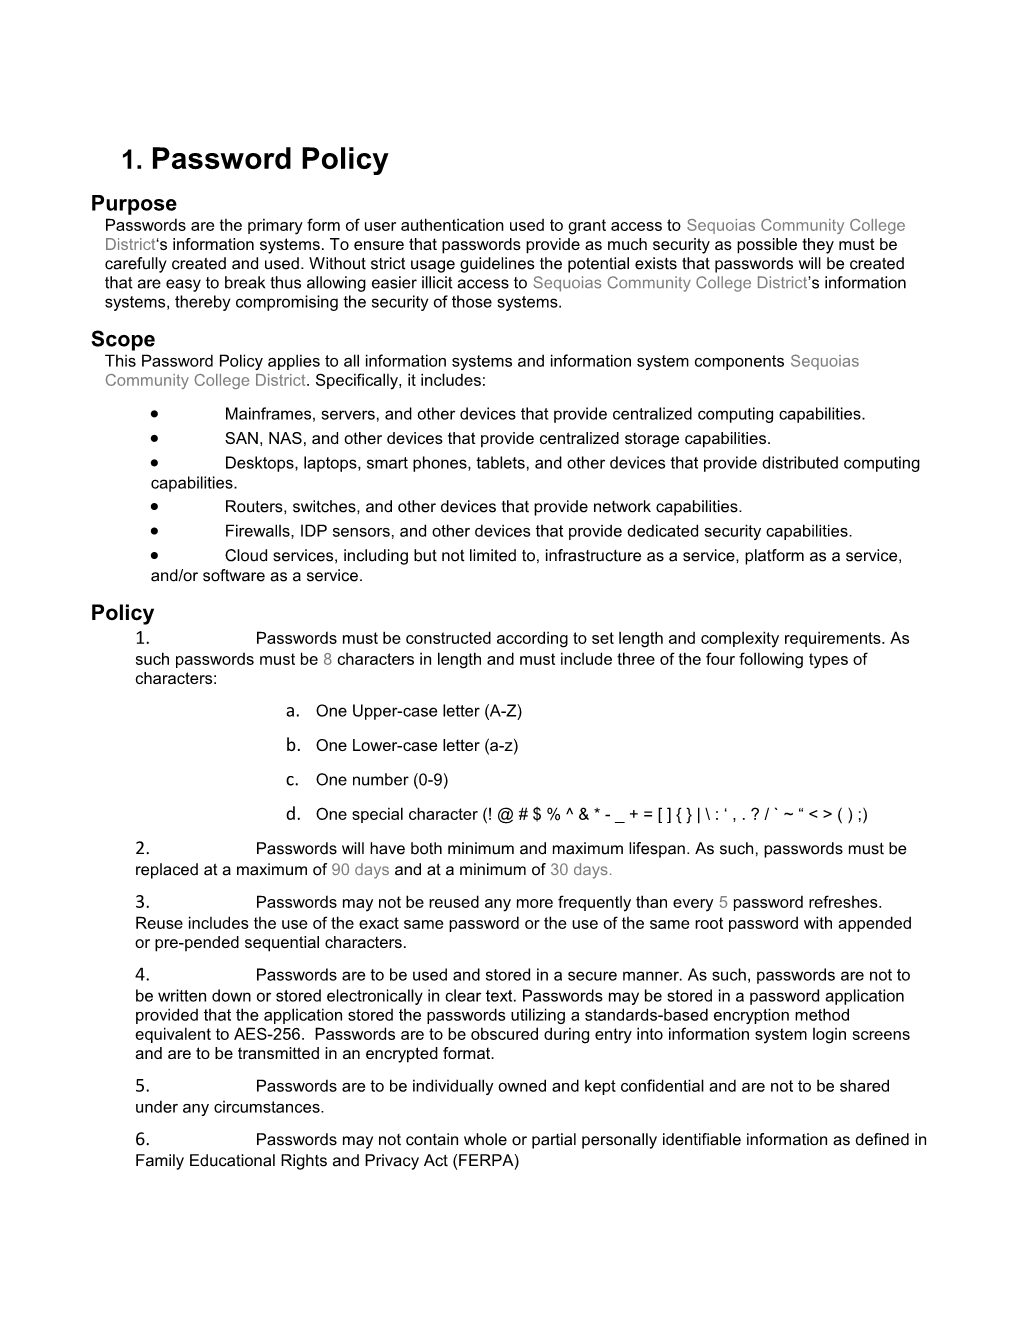 SCCD - Password Policy